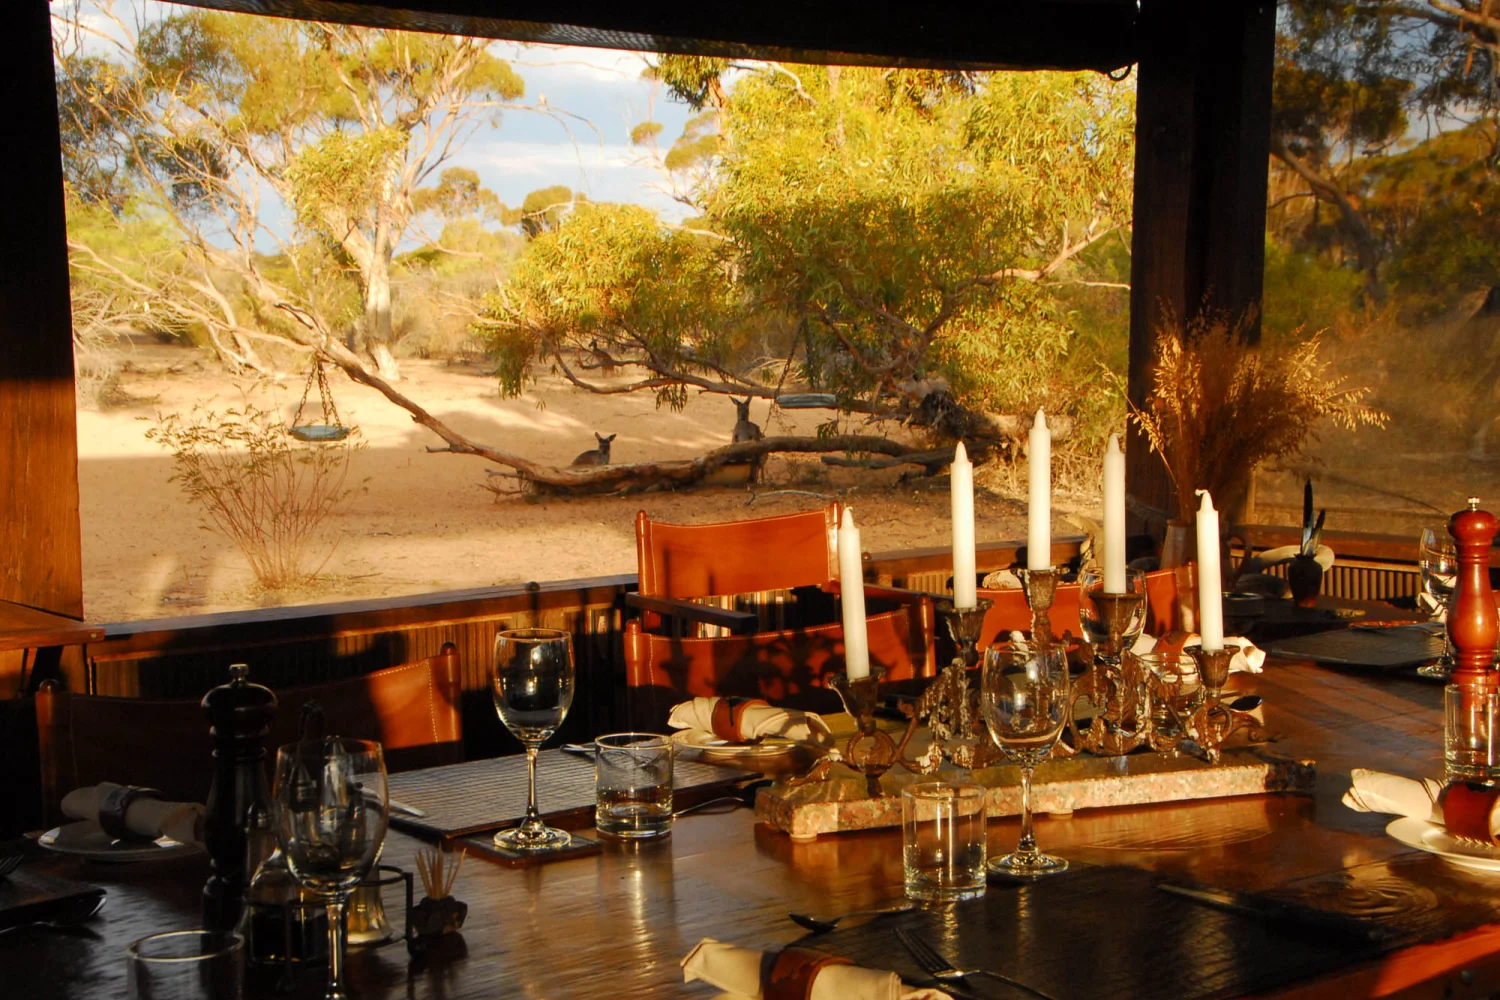 Gawler Ranges - dining room with kangaroos in the background - Kangaluna Camp - South Australia